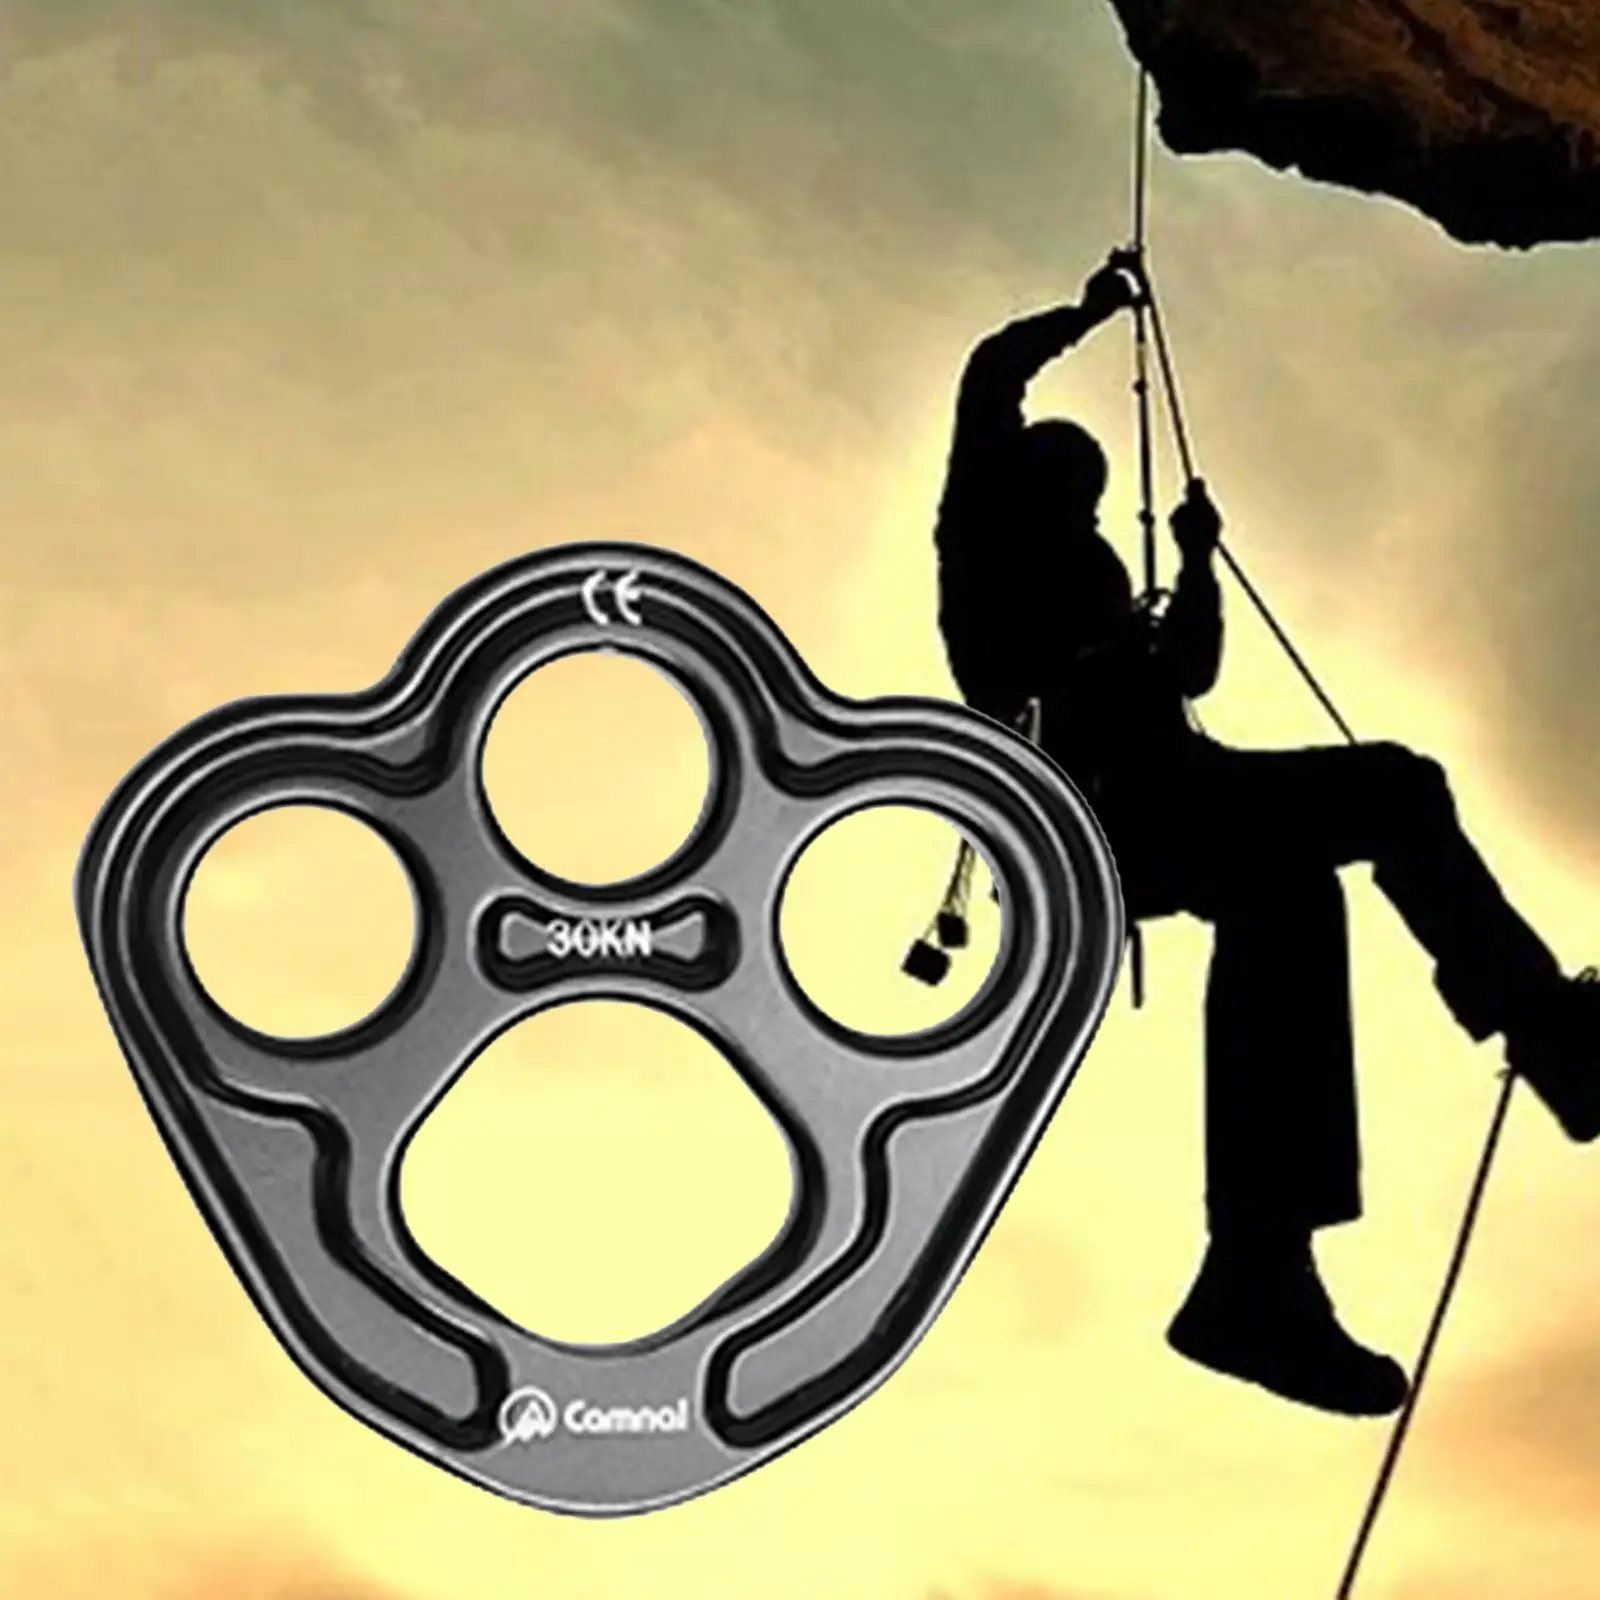 28KN Paw Rigging Plate Anchor Device for Climbing Dance Caving